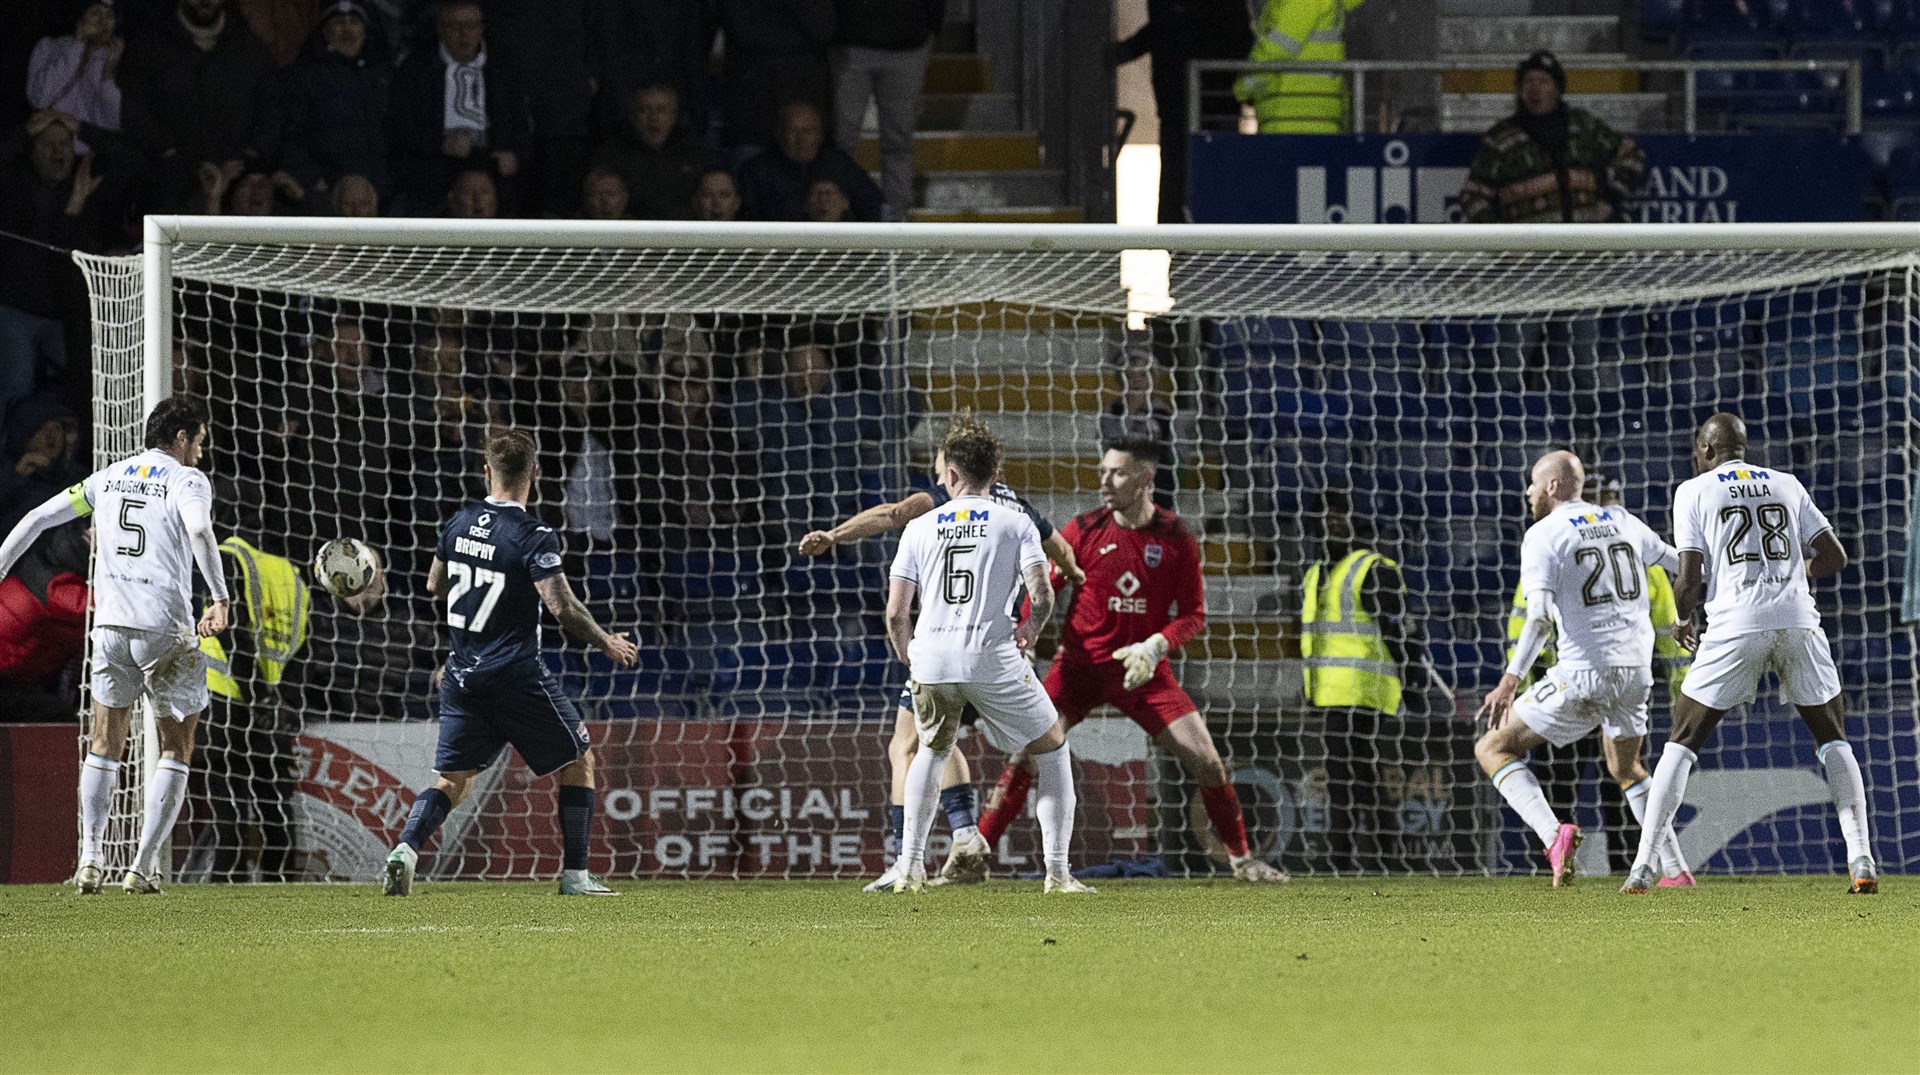 Joe Shaughnessy's fortuitous goal consigned the Staggies to defeat last weekend. Picture: Ken Macpherson